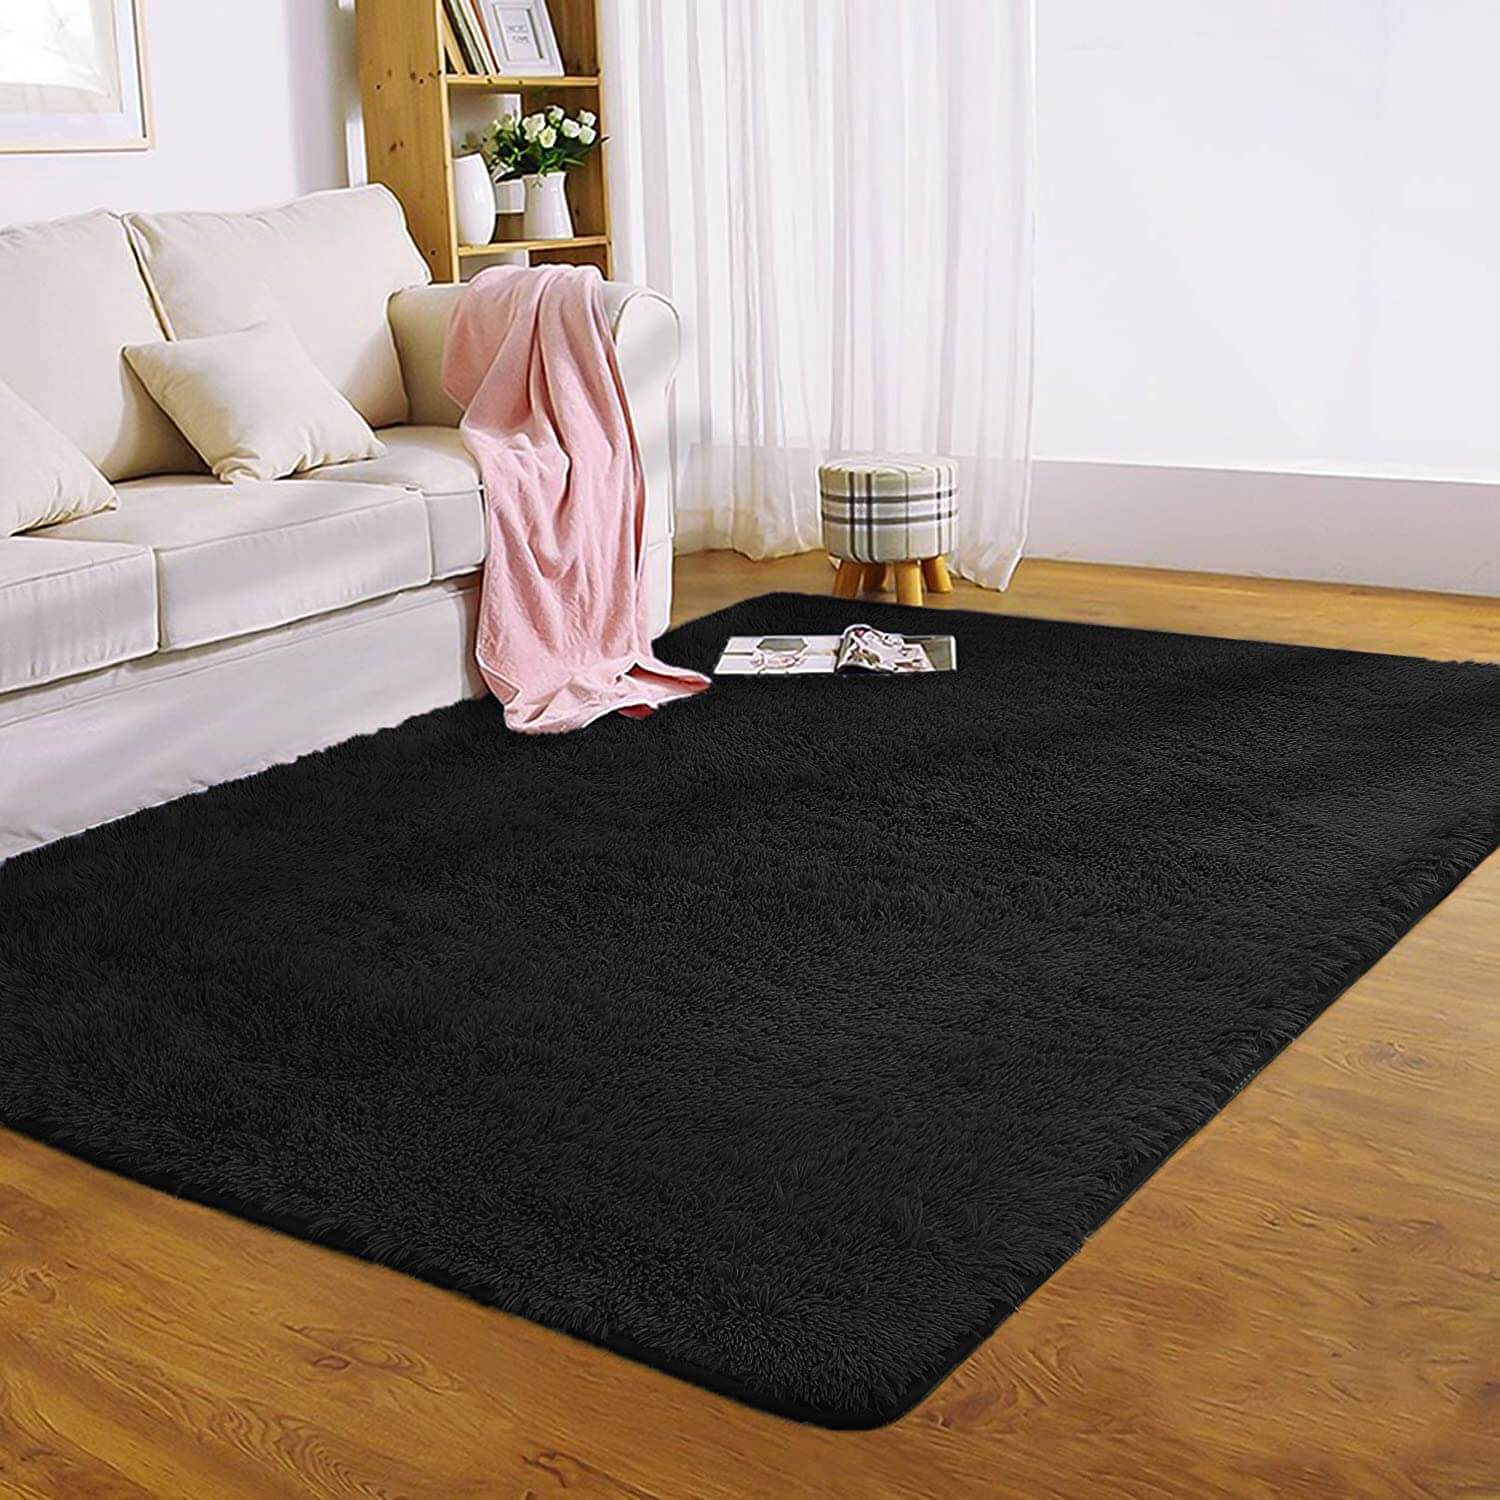 Indoor Area Rugs - Fluffy Living Room Carpets